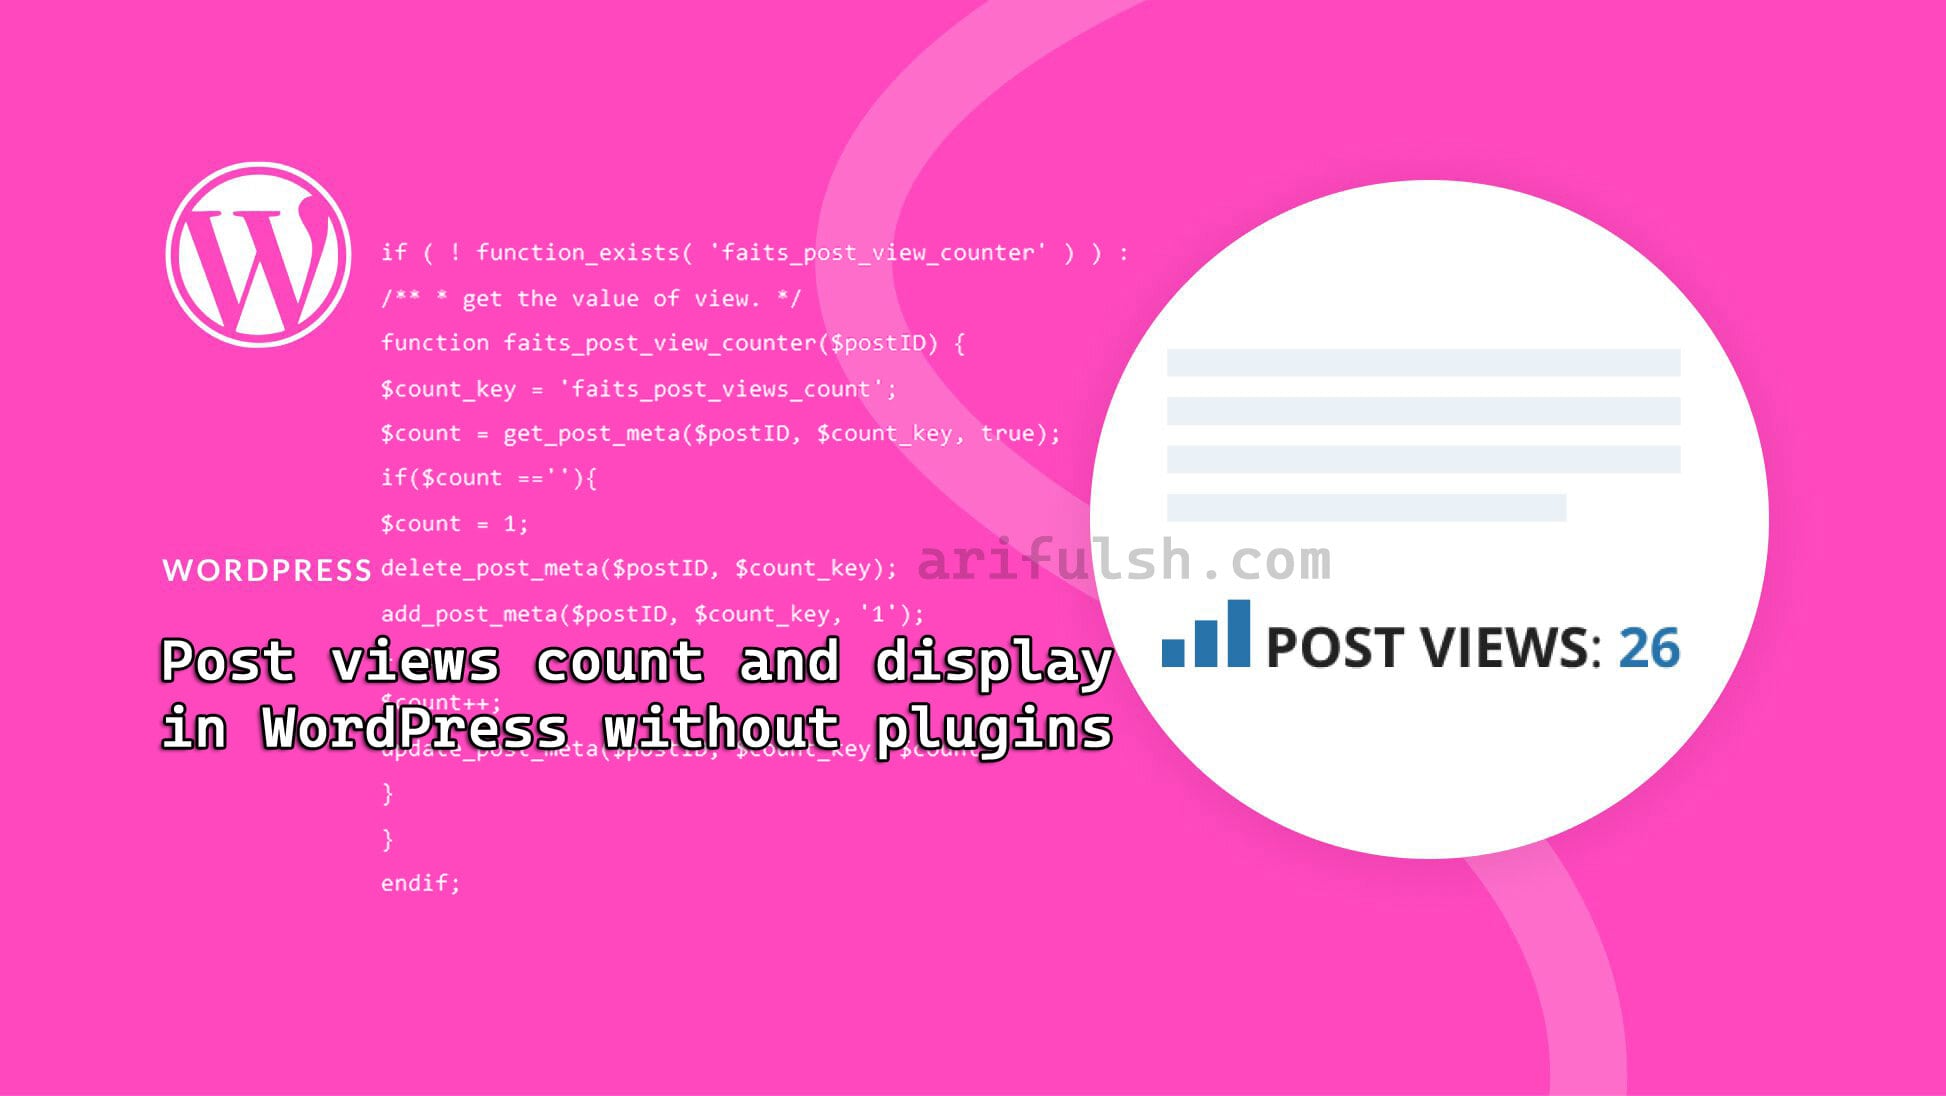 Post views count and display in WordPress without plugins